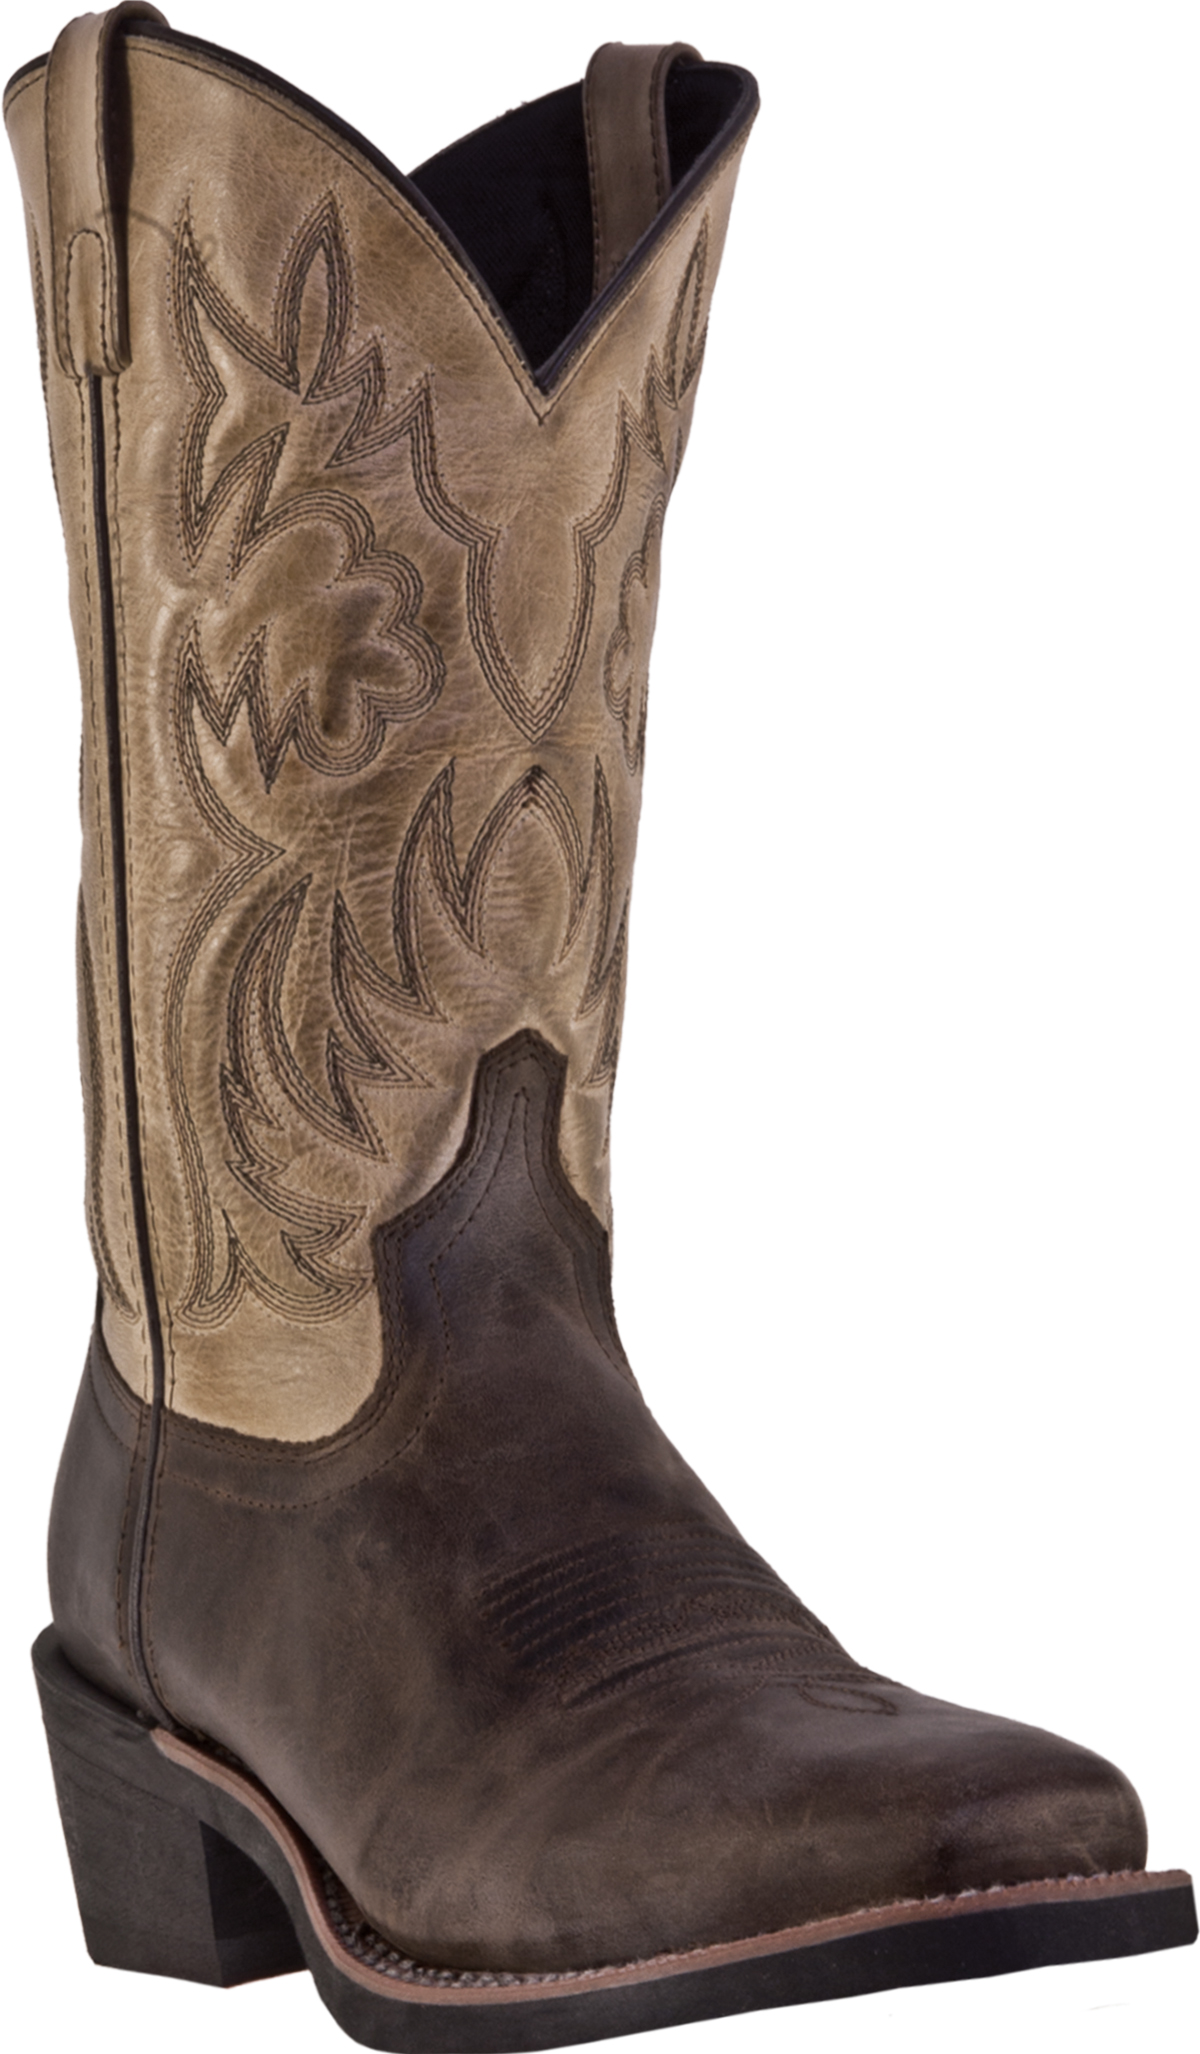 Laredo Men's 68351 Breakout 12" Cowboy Approved Western Cowboy Boot Wide Width Available - Brown/Tan